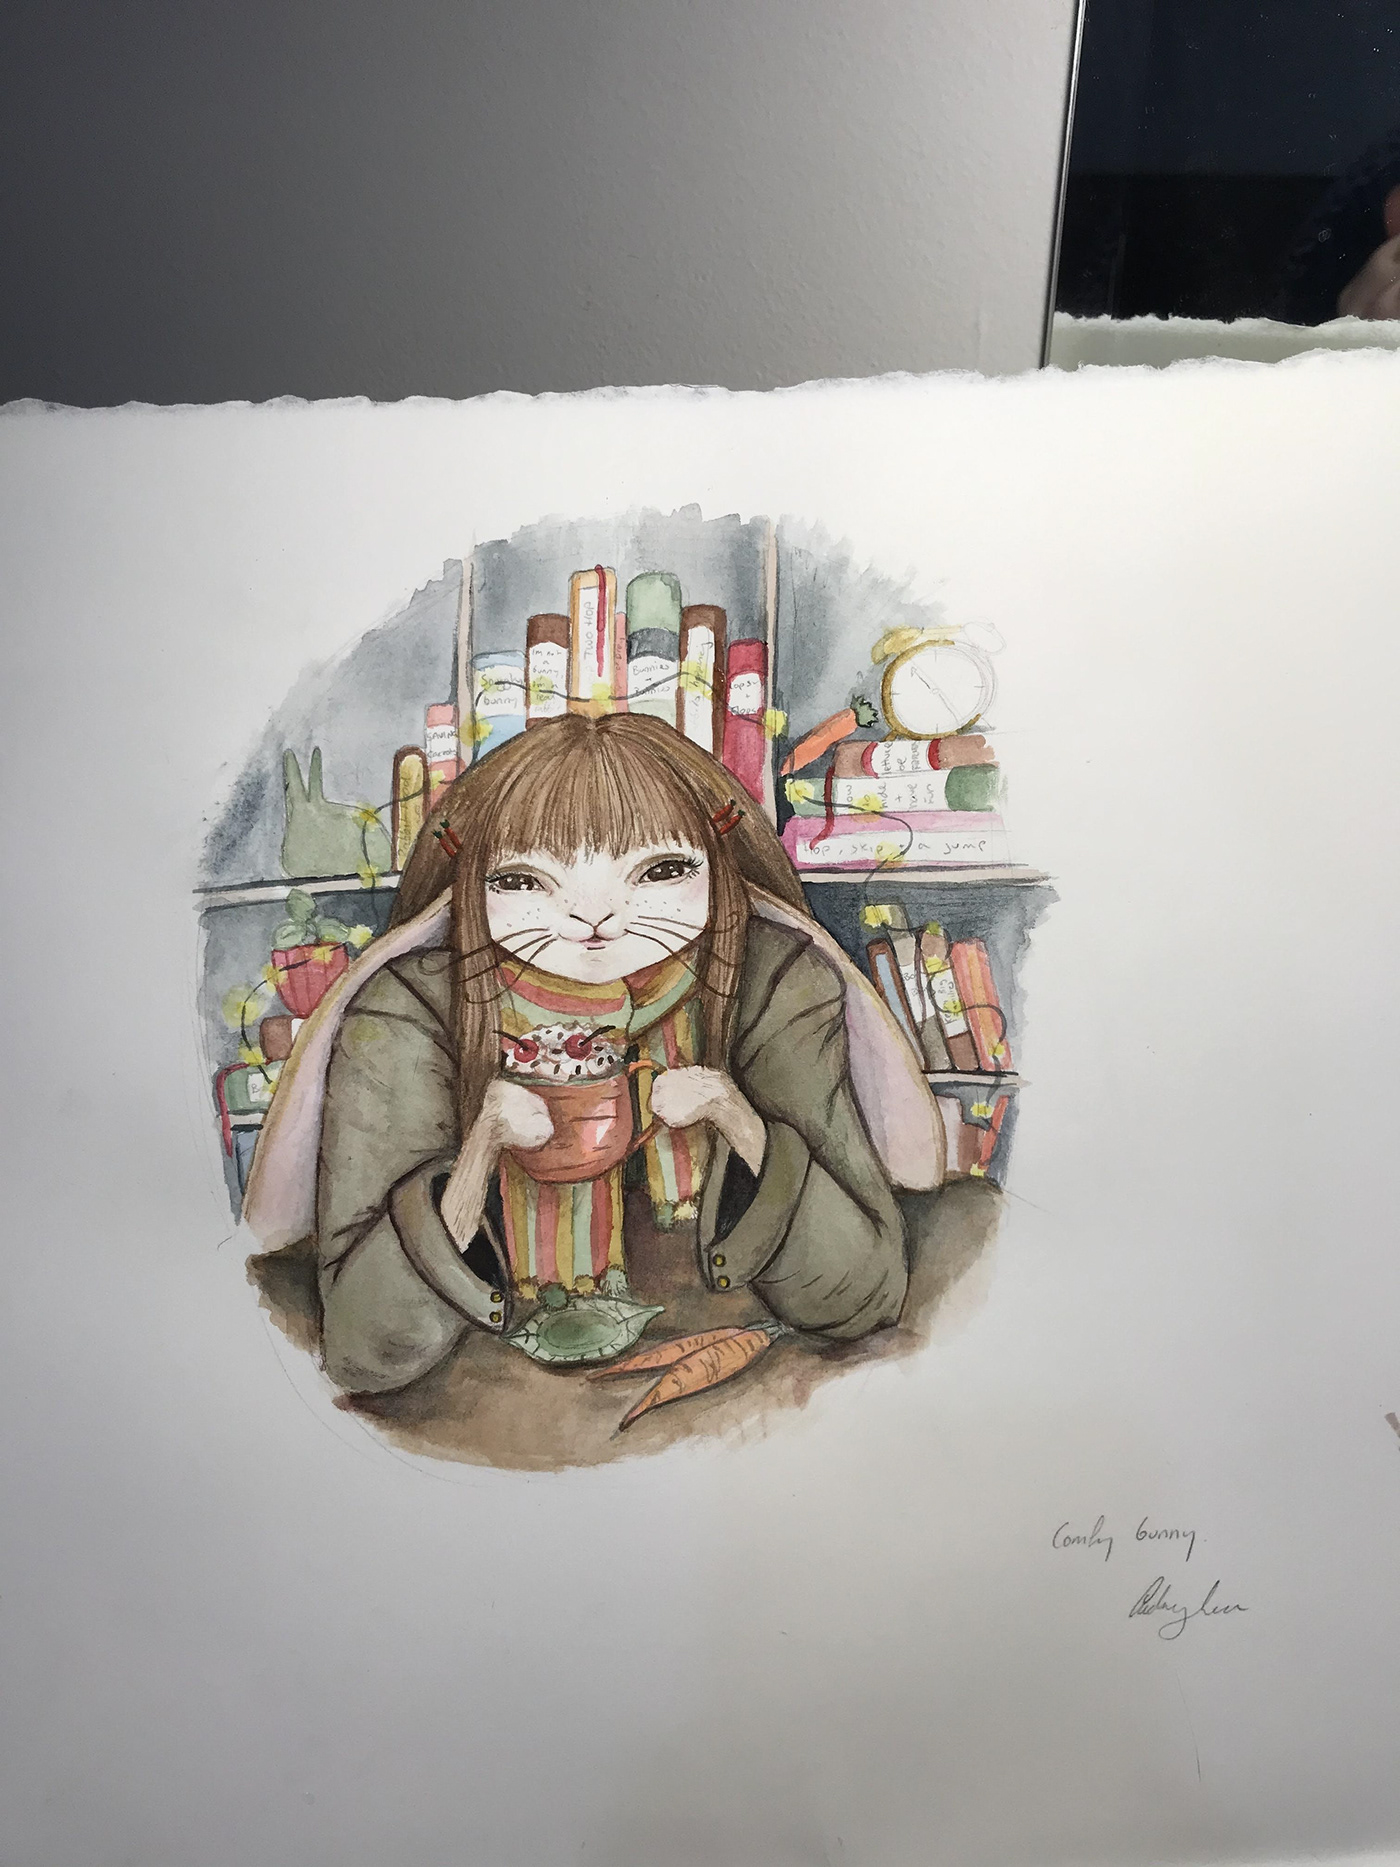 anthro Anthropology books Bookstore bunny bunny rabbit cute girl hare ILLUSTRATION  painting   rabbit tea watercolor